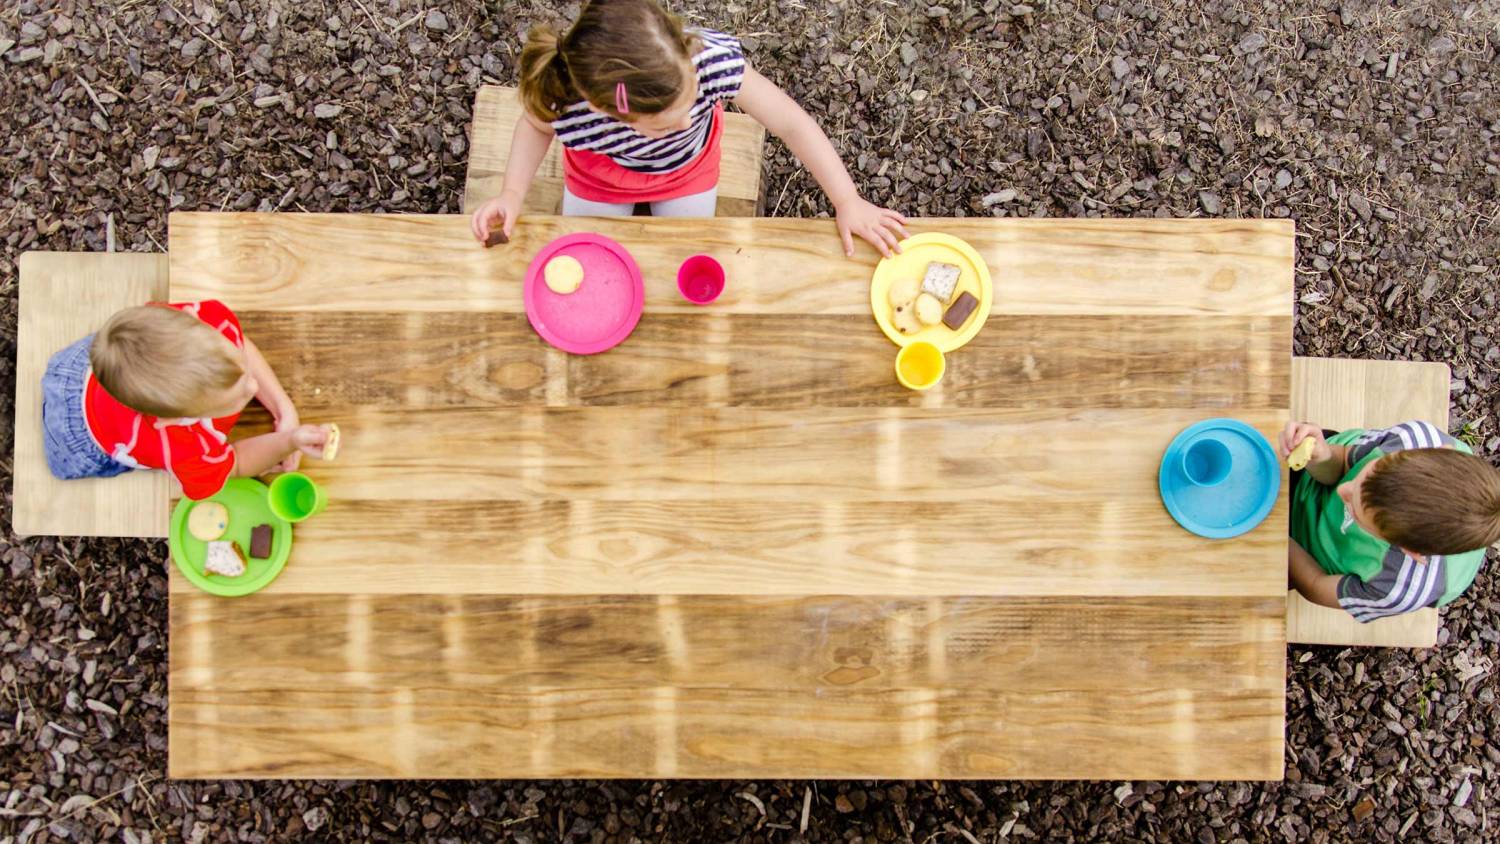 Outdoor table for schools